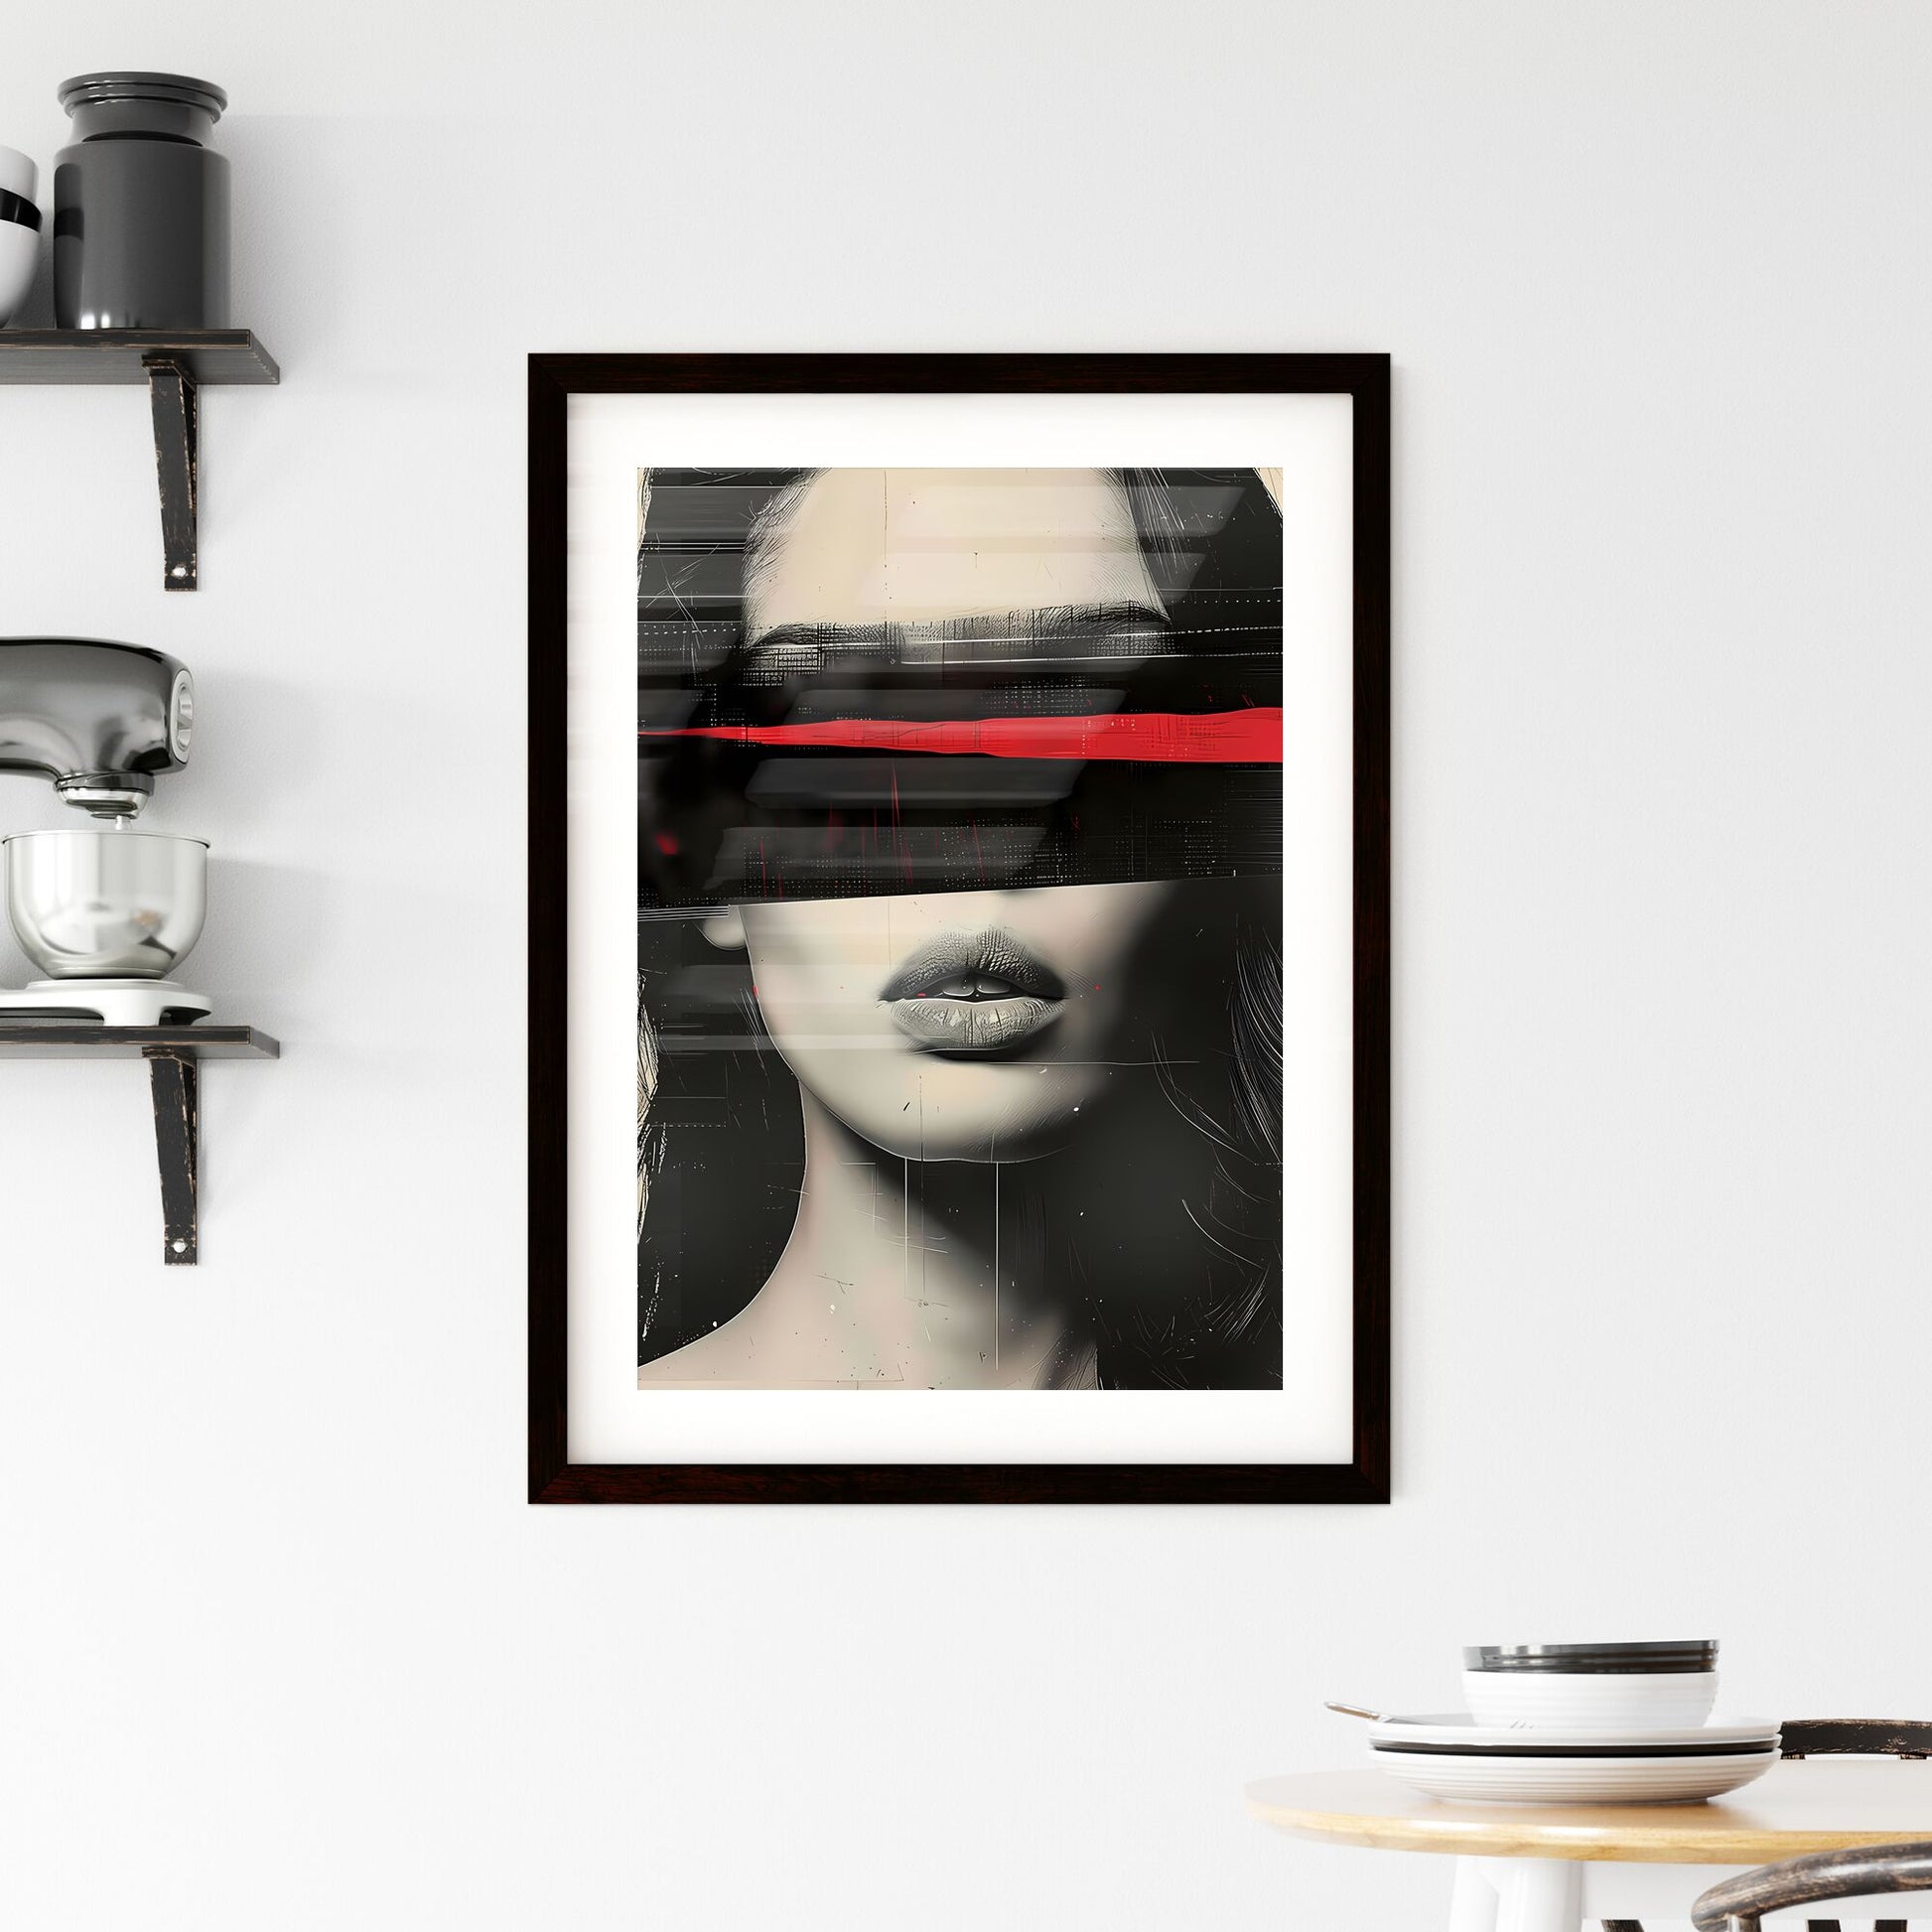 Vibrant Abstract Woman Portrait: Black, Grey, and Red Digital Collage with Striped Eyes Default Title